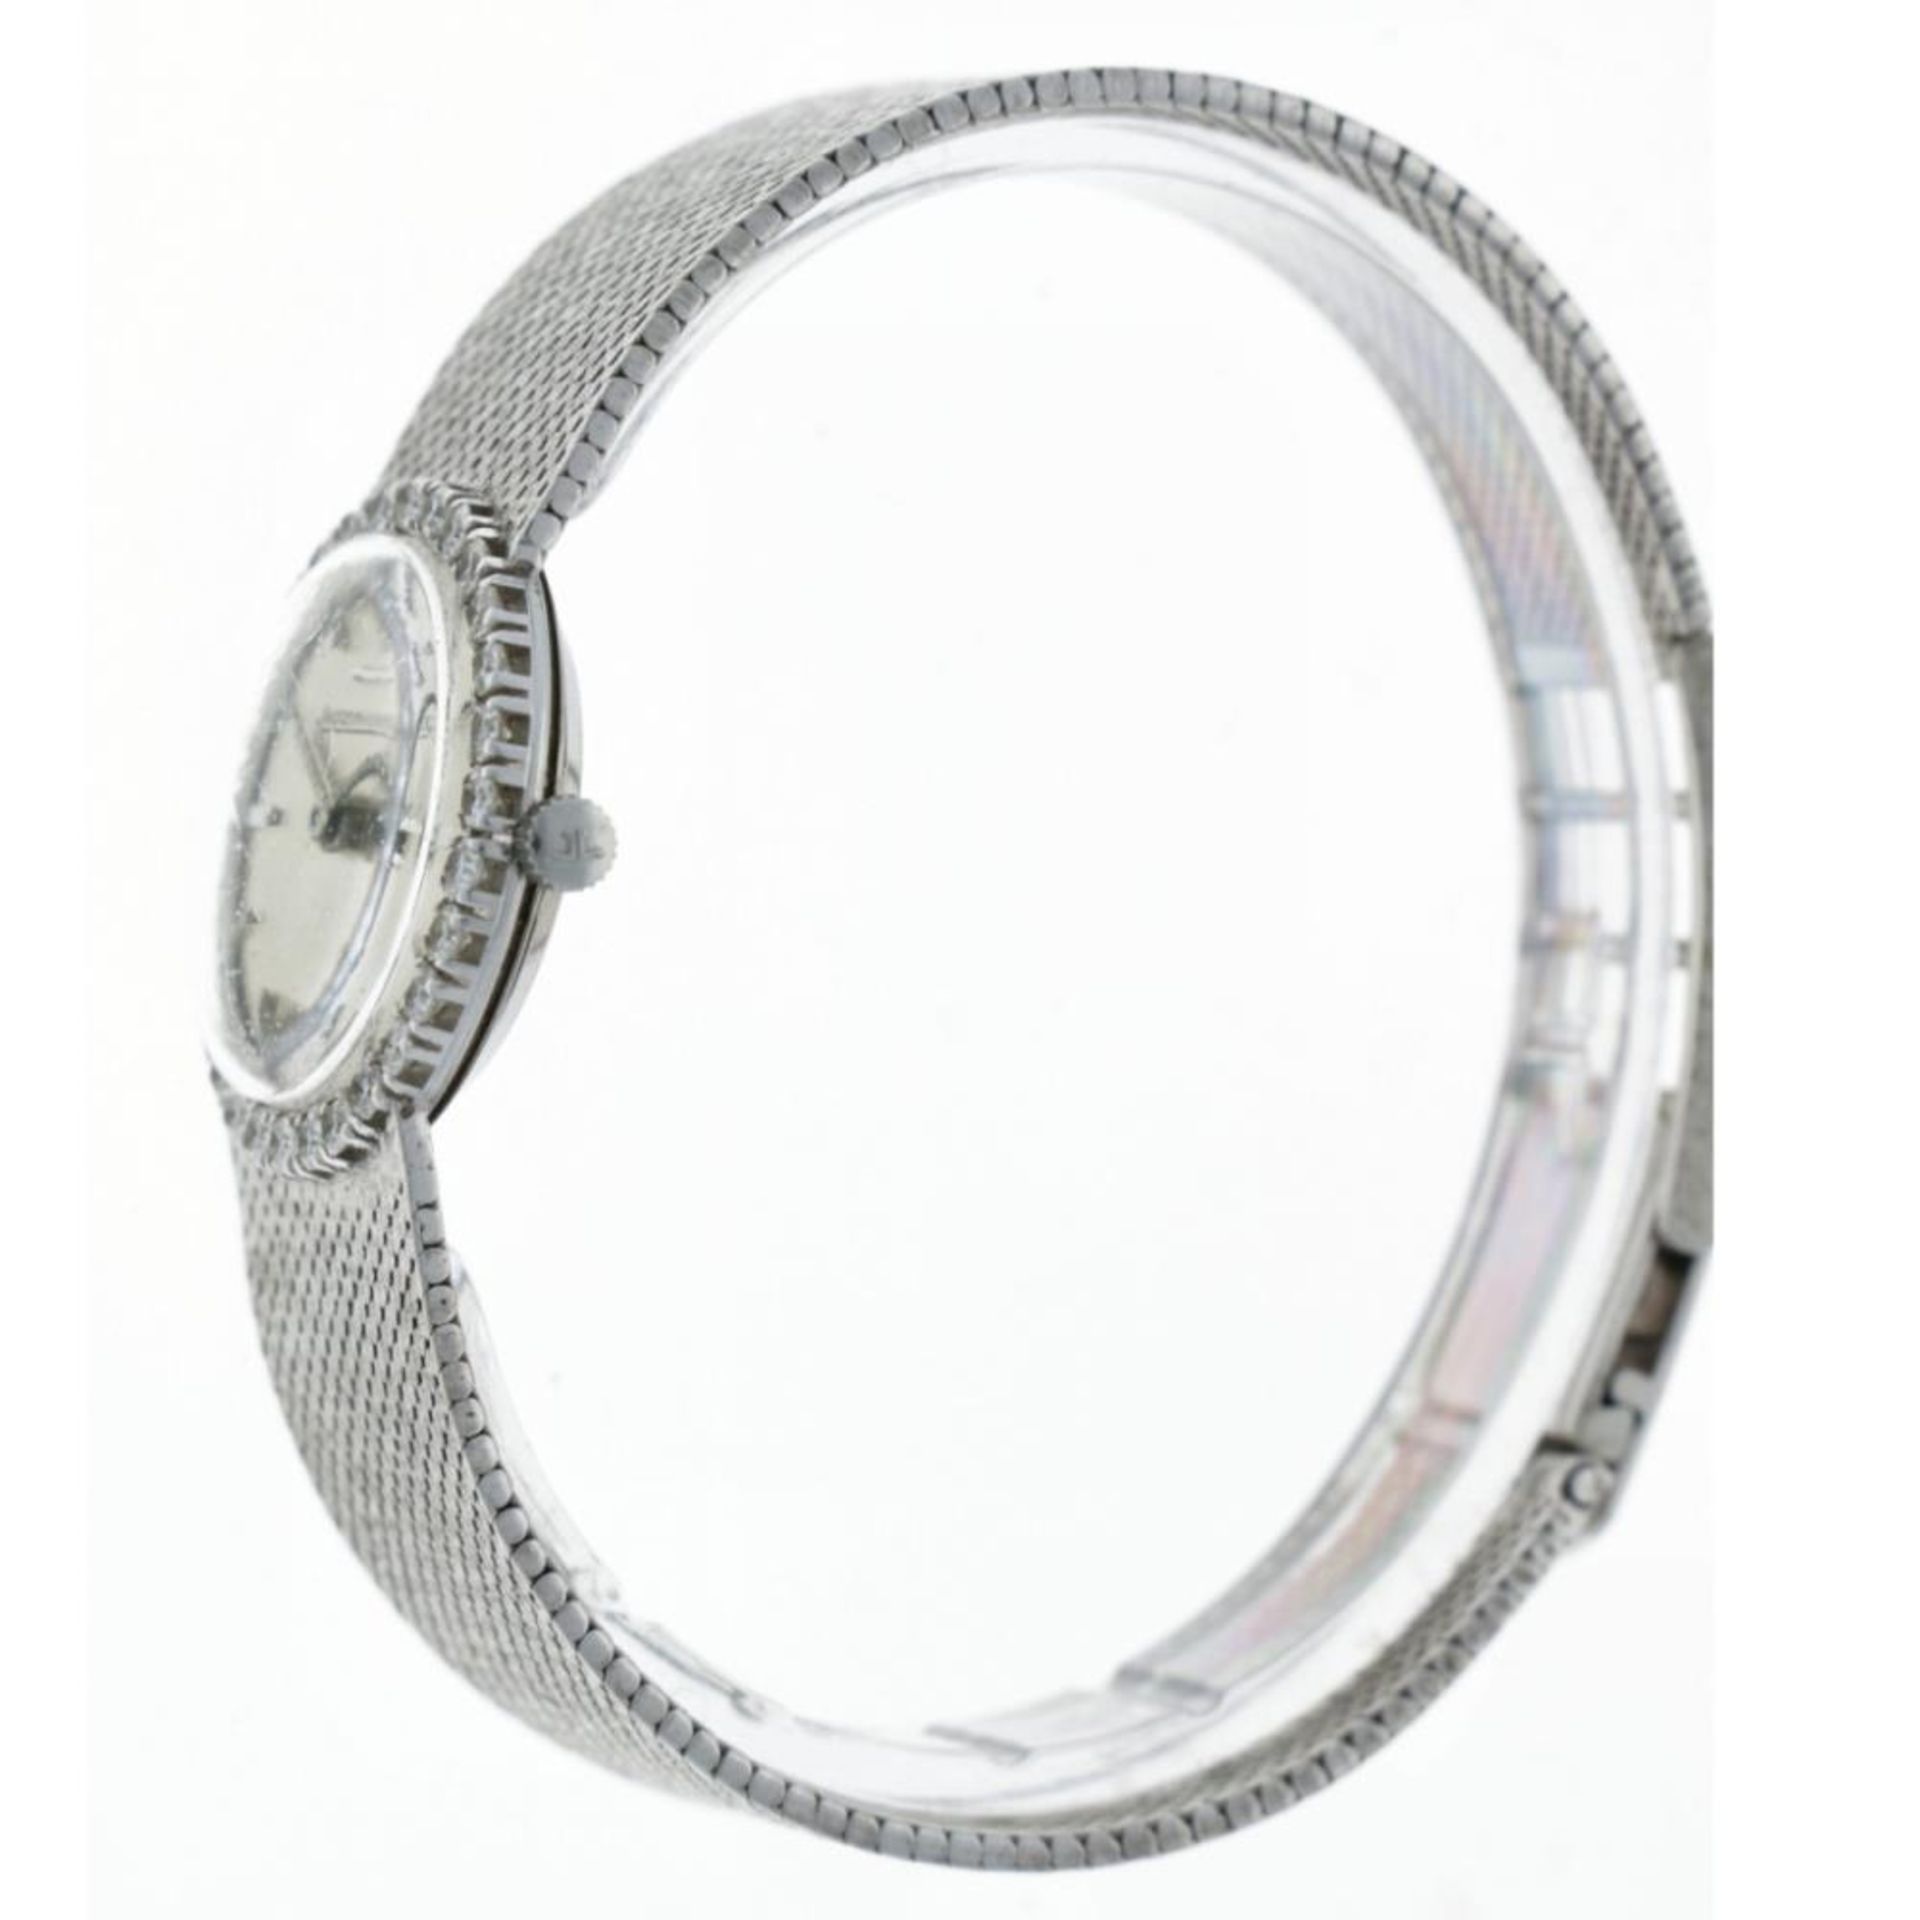 Jaeger-LeCoultre - Ladies watch - approx. 1960. - Image 10 of 10